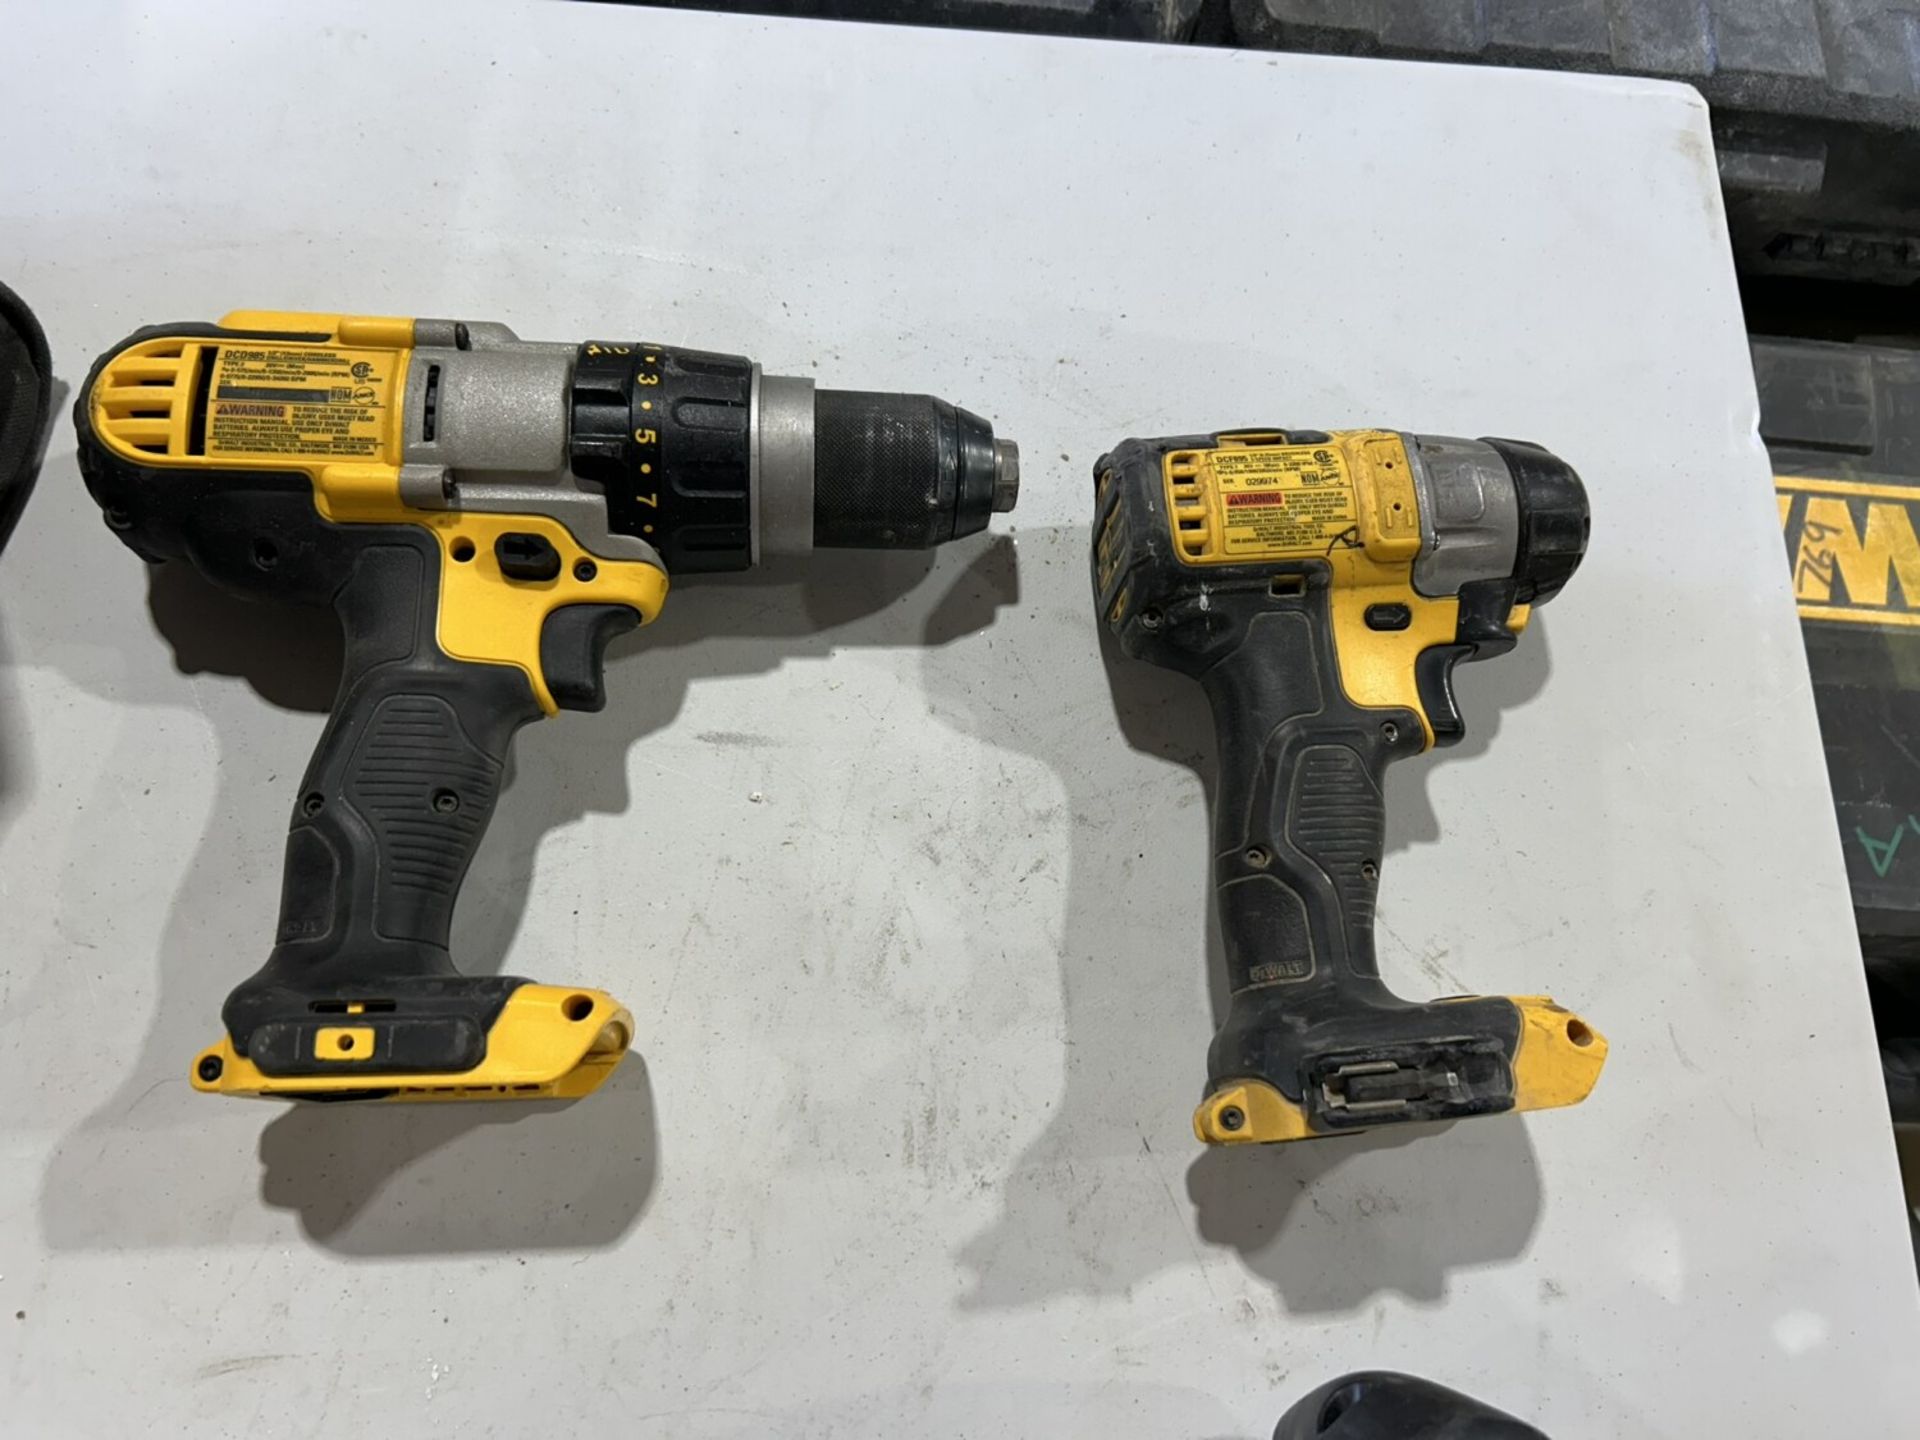 DEWALT CORDLESS 4.25" CIRCULAR SAW, IMPACT DRIVER, DRILL, & LIGHT W/ BATTERY AND CHARGER - Image 7 of 10